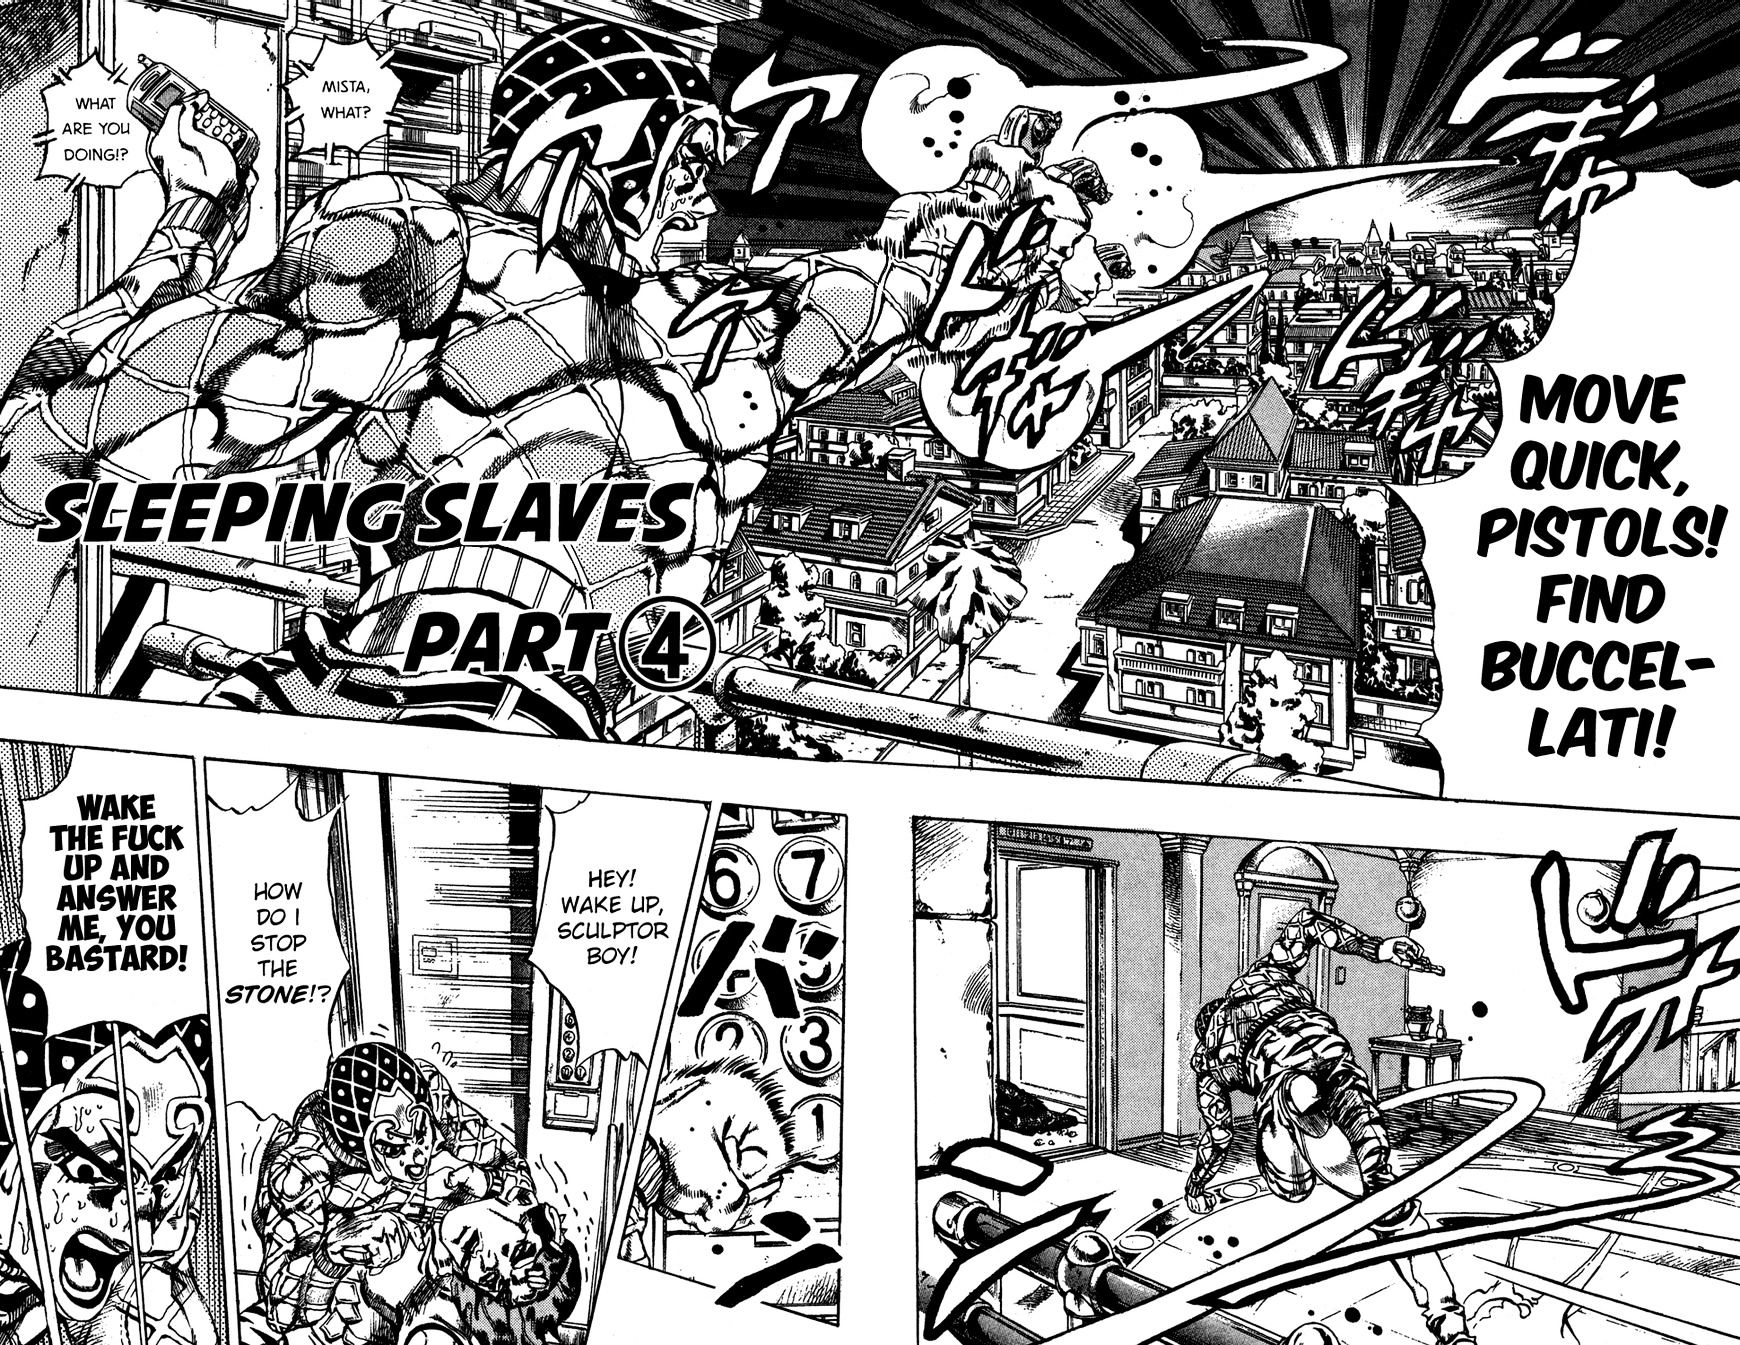 Vento Aureo Chapter 593 : Sleeping Slaves - Part 4 - Picture 3